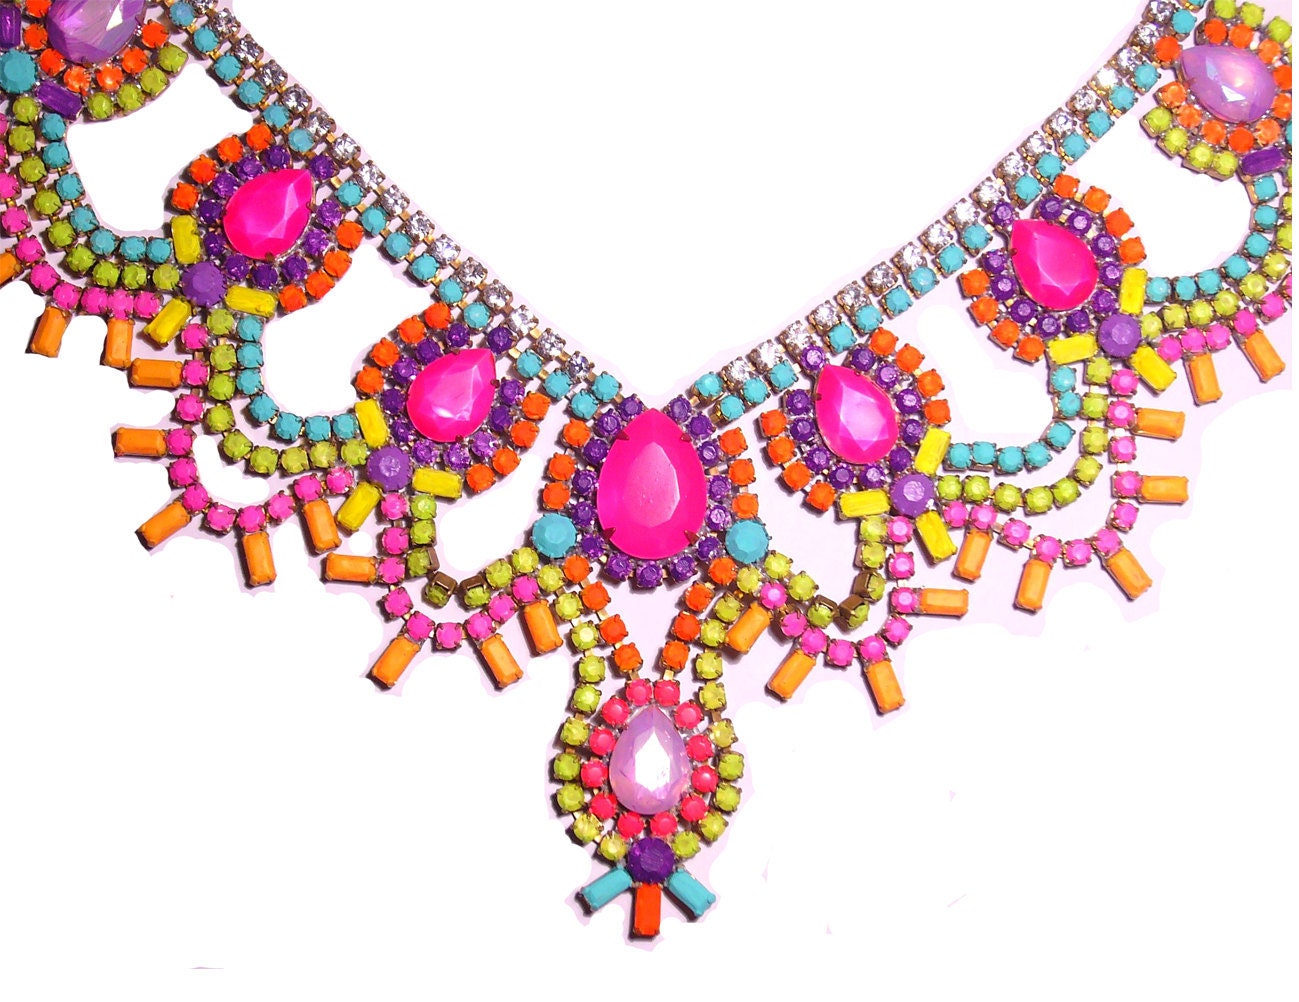 Reserved for Chrissie only - One of a Kind Pastel and Neon Handpainted Vintage Rhinestone Necklace